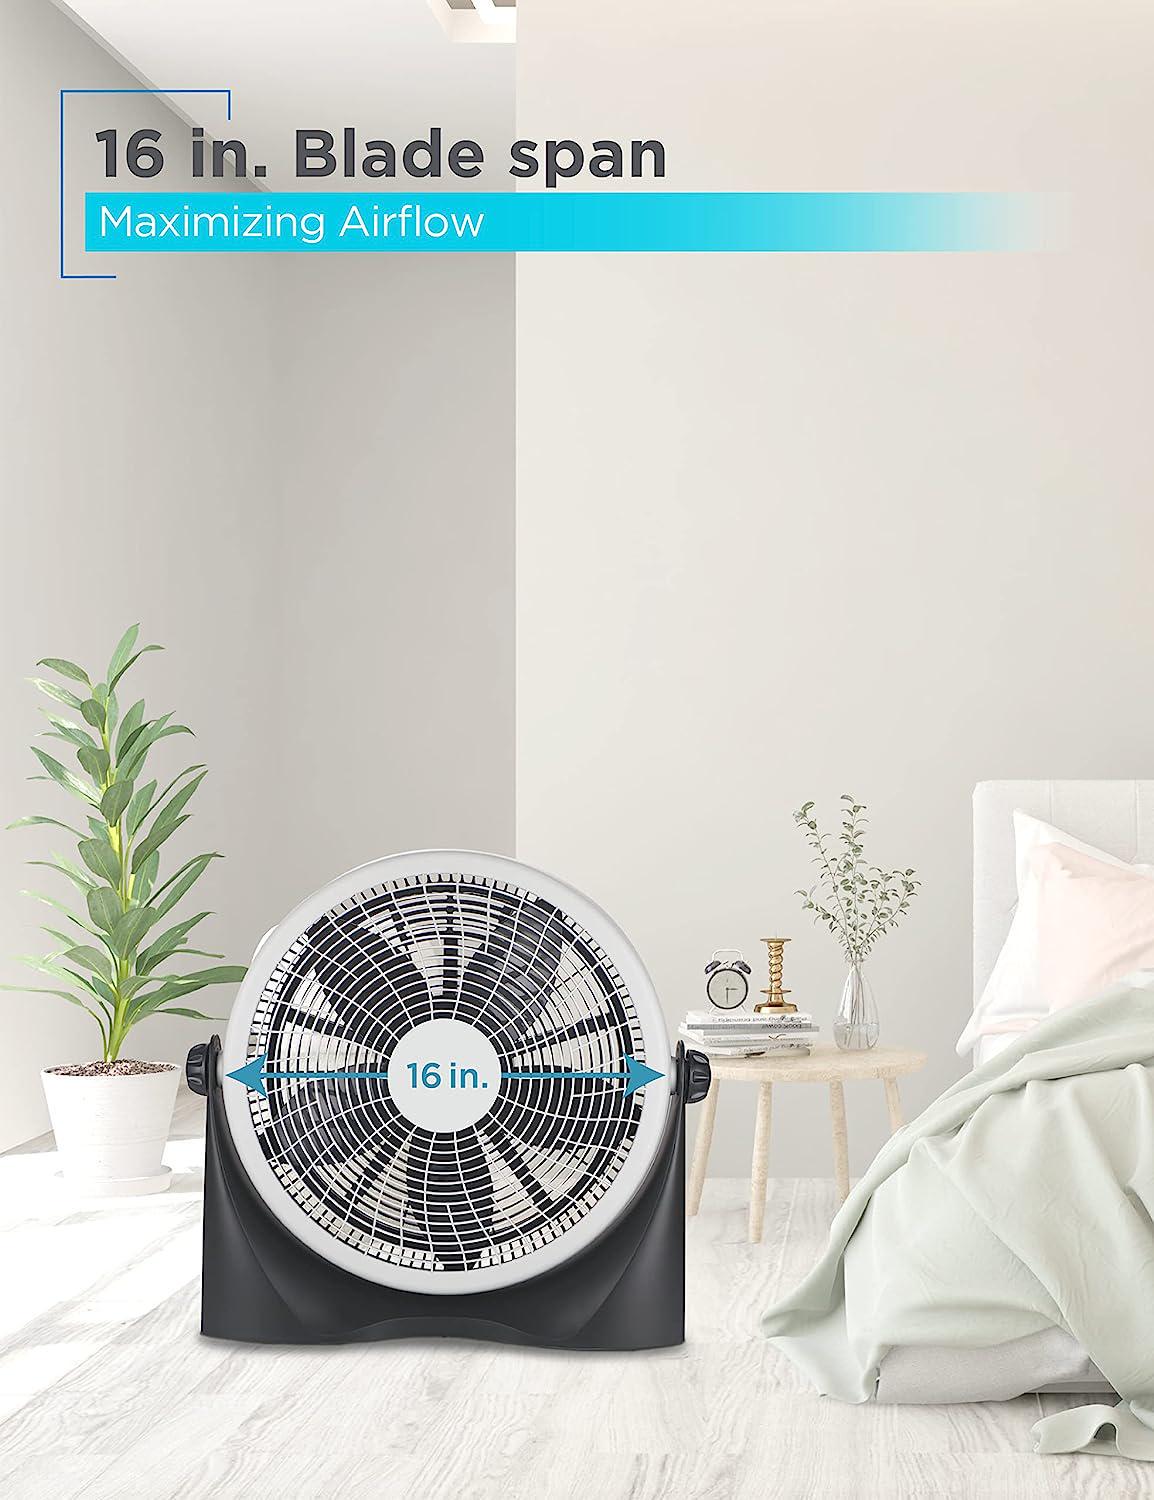 Floor Fan for Home, Garage, Bedroom, or Office, Cooling Fan for Floor with 3 Fan Settings, Quiet Floor Fan with Adjustable Tilt Angle and Sturdy Base